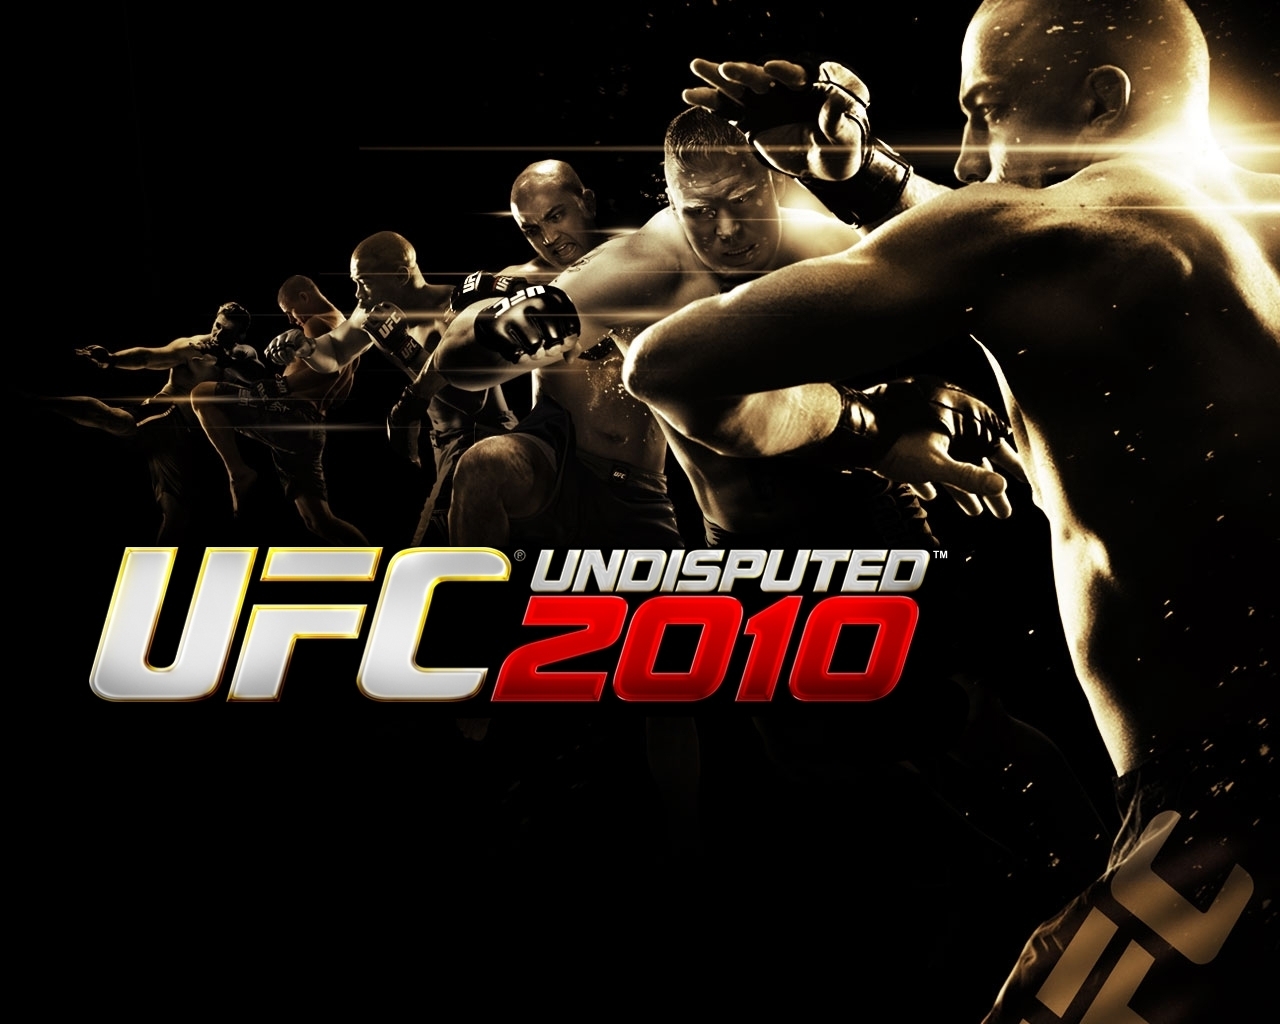 UFC Undisputed 2010 for 1280 x 1024 resolution